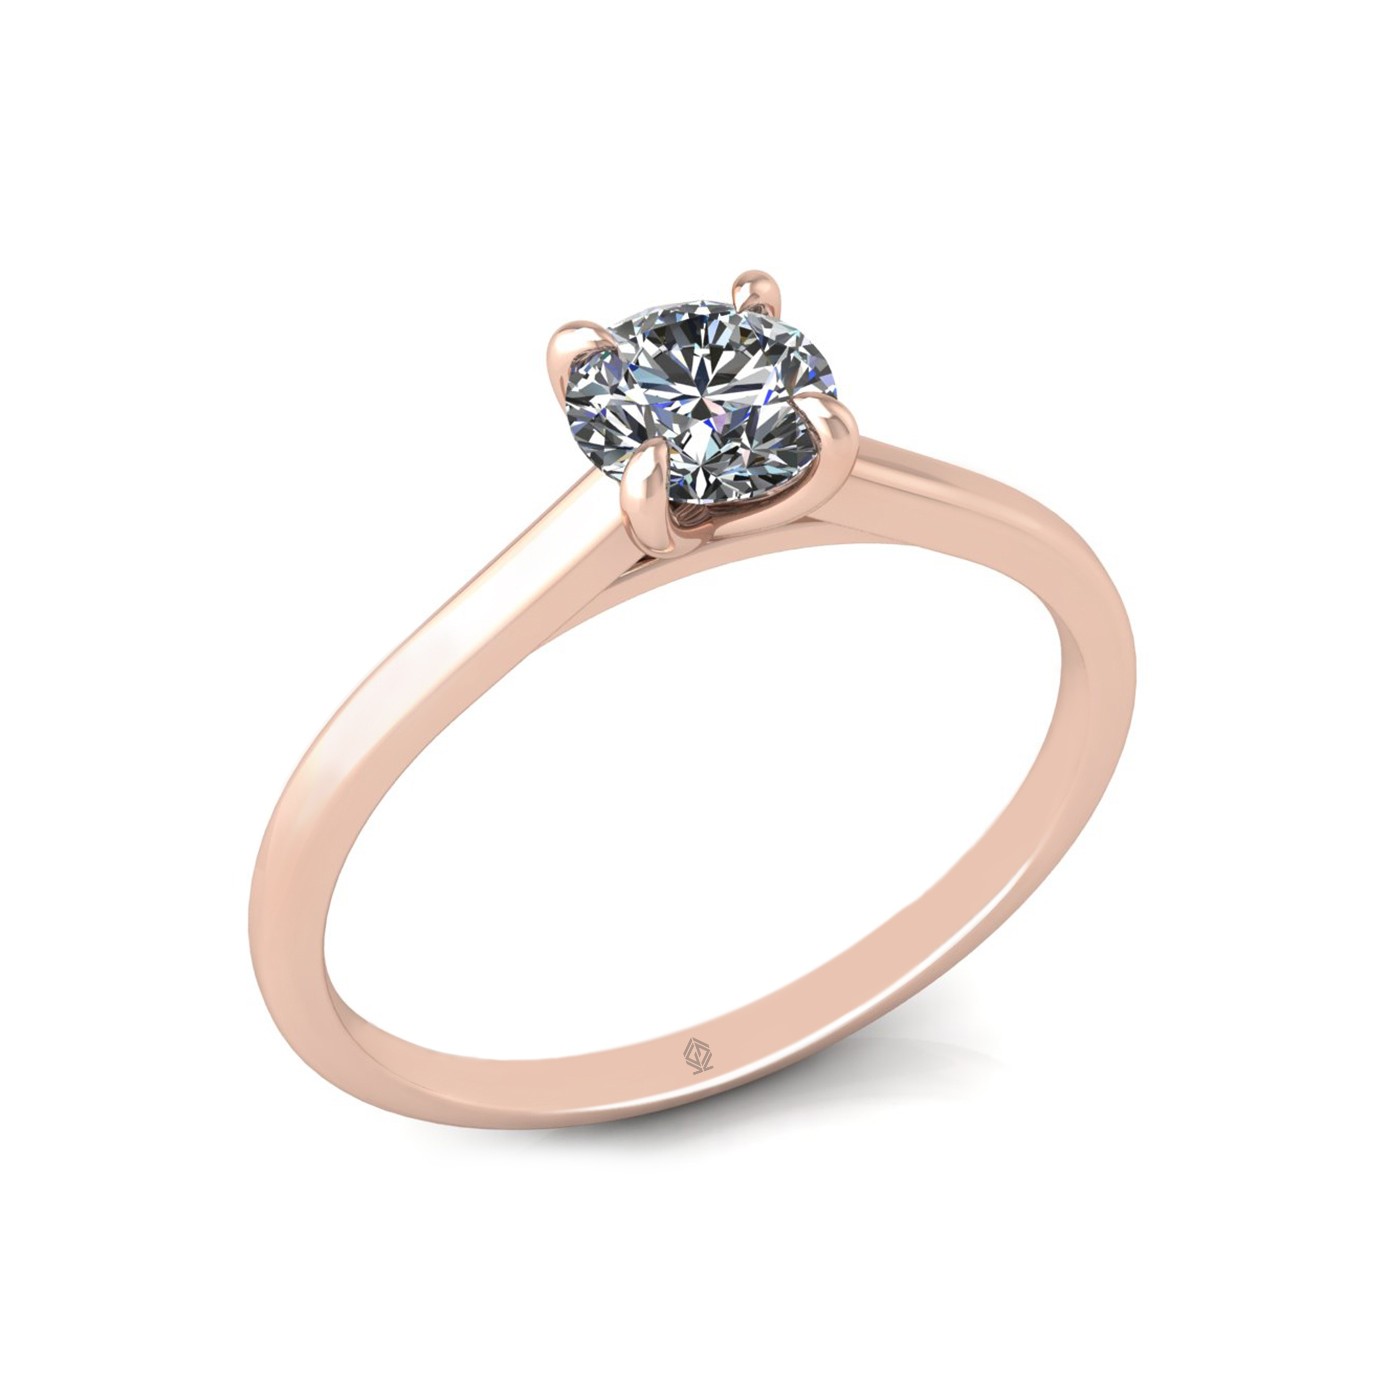 18k rose gold 0.50ct 4 prongs solitaire round cut diamond engagement ring with whisper thin band